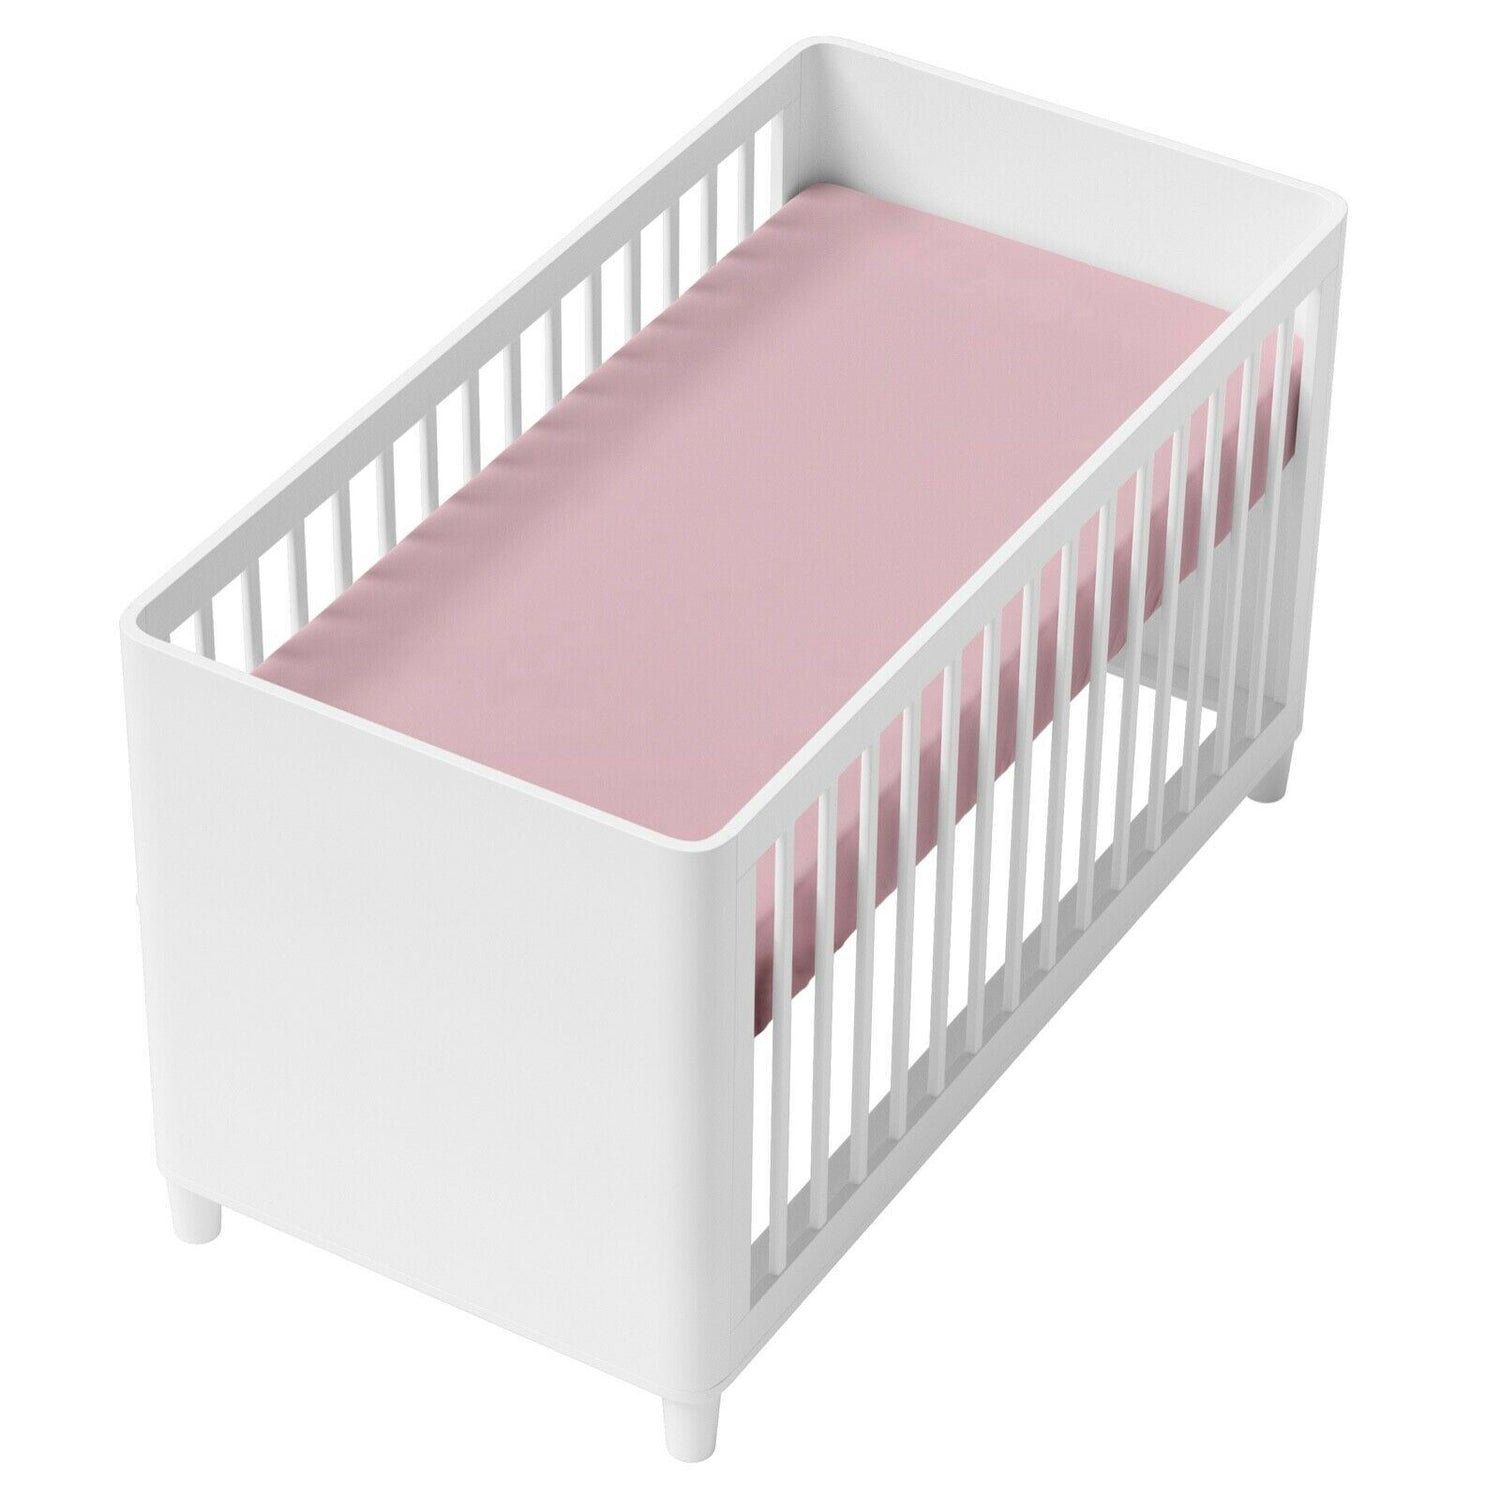 Super Soft Fitted Sheet Jersey Stretchy Cotton Fit Crib/Cradle 90X40 Pink